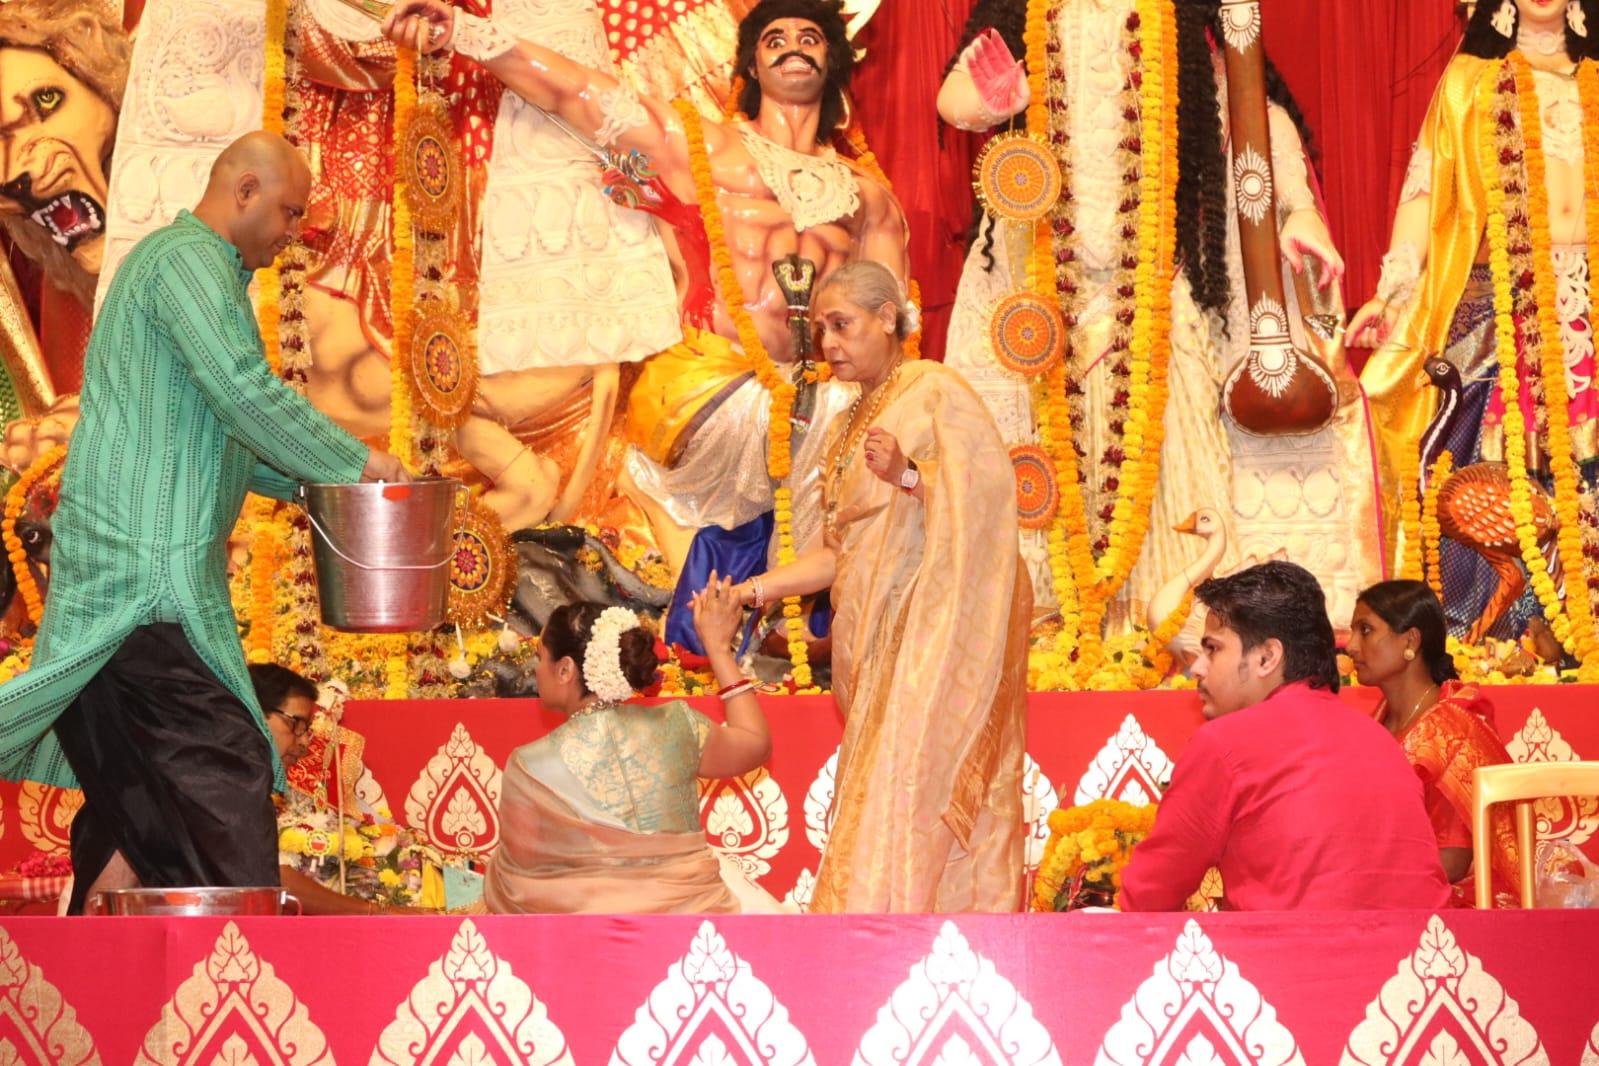 Jaya Bachchan was clicked as she visited the star-studded Durga puja pandal